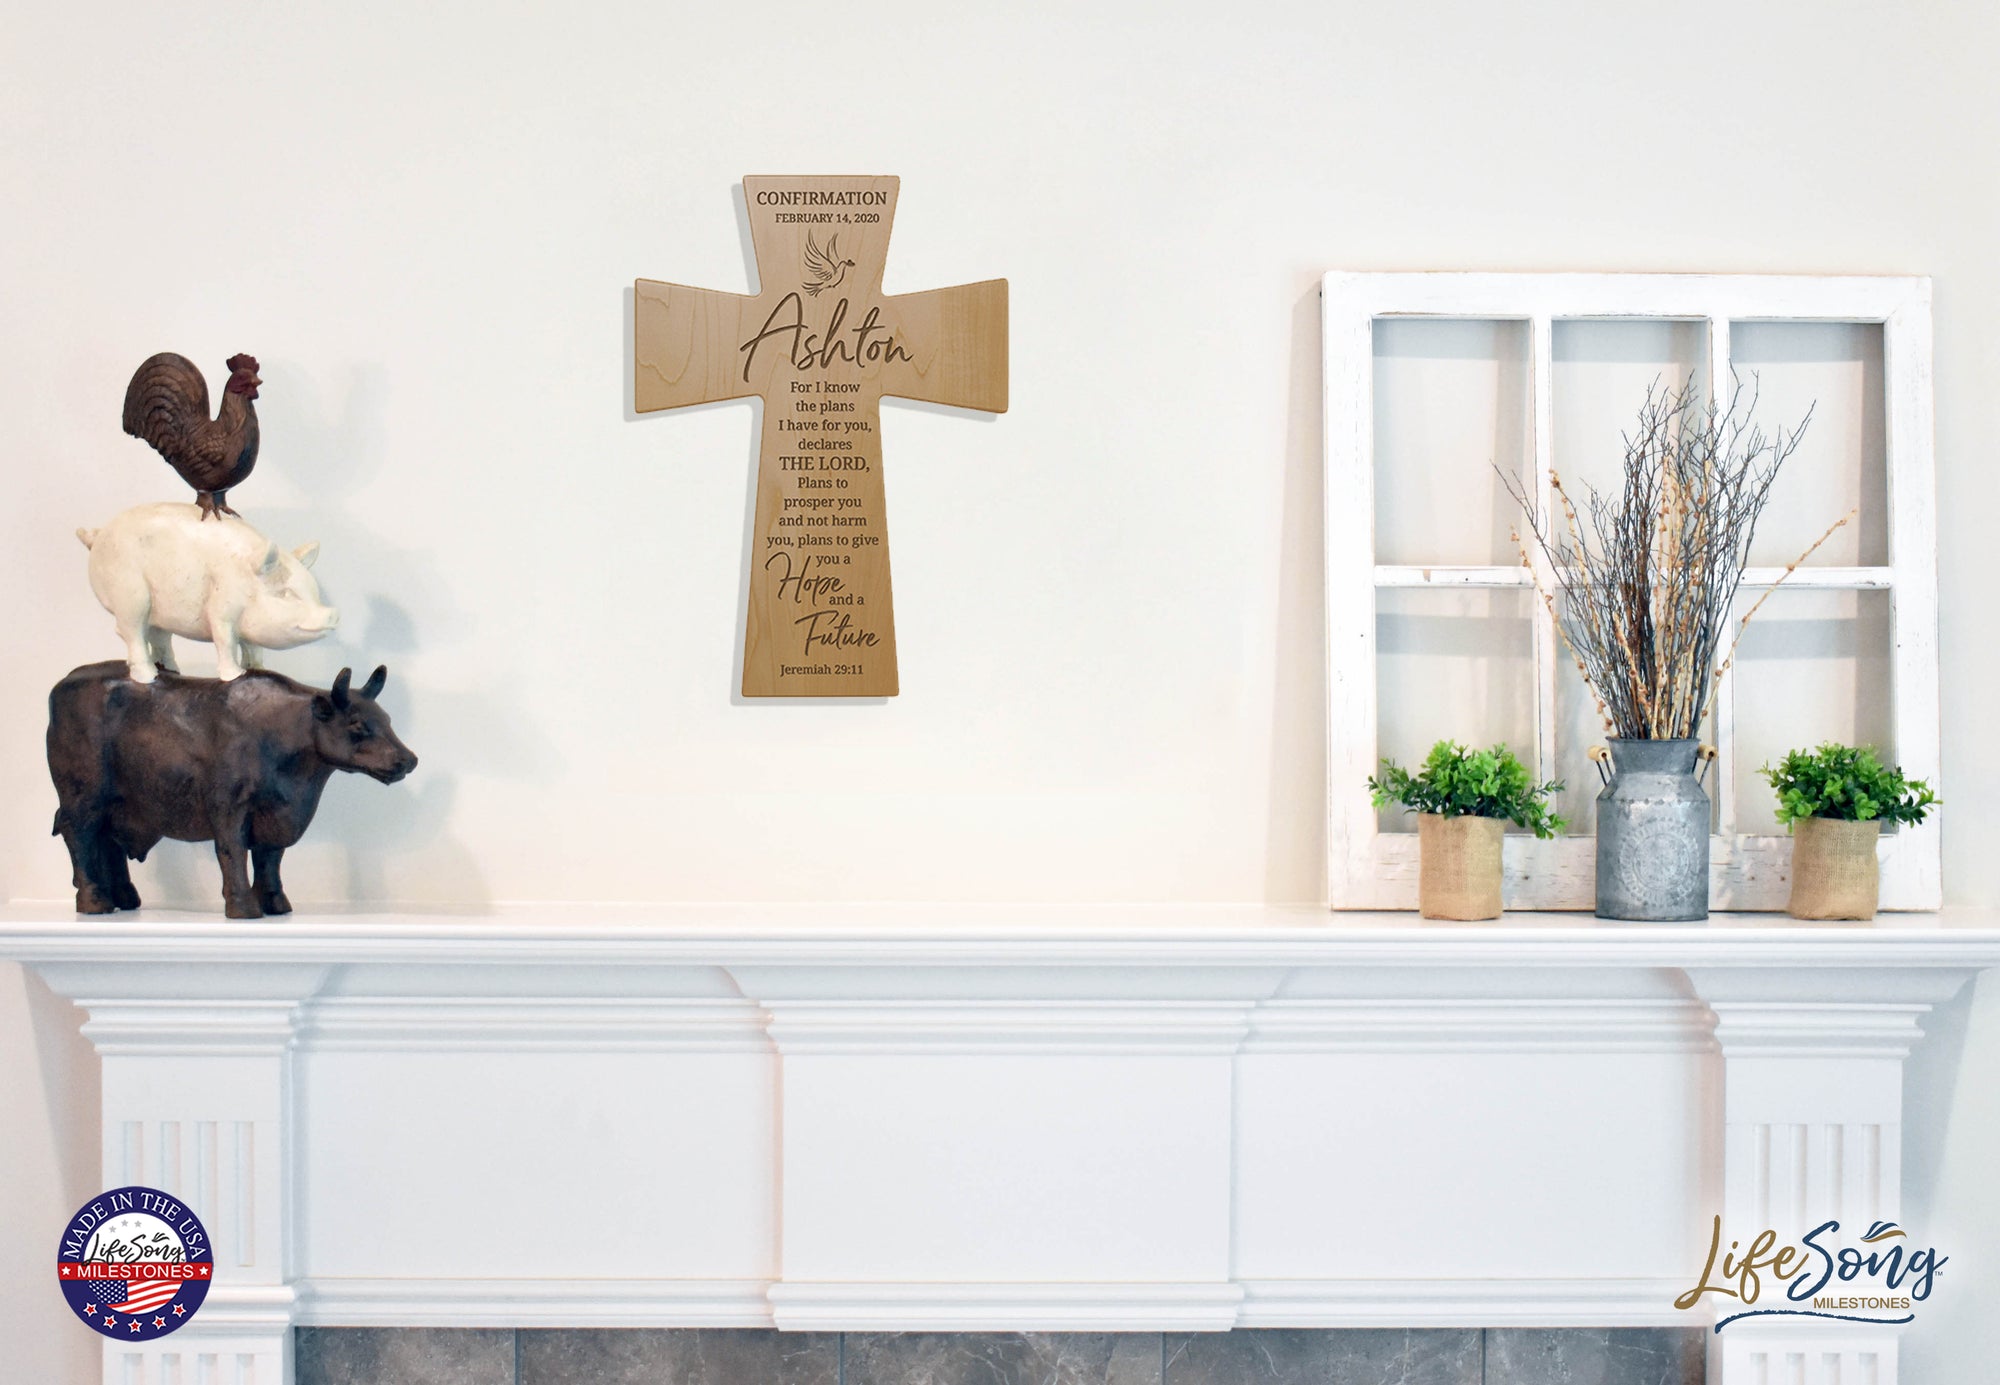 Custom Confirmation Wall Cross - For I know the plans I have for you - Jeremiah 29:11